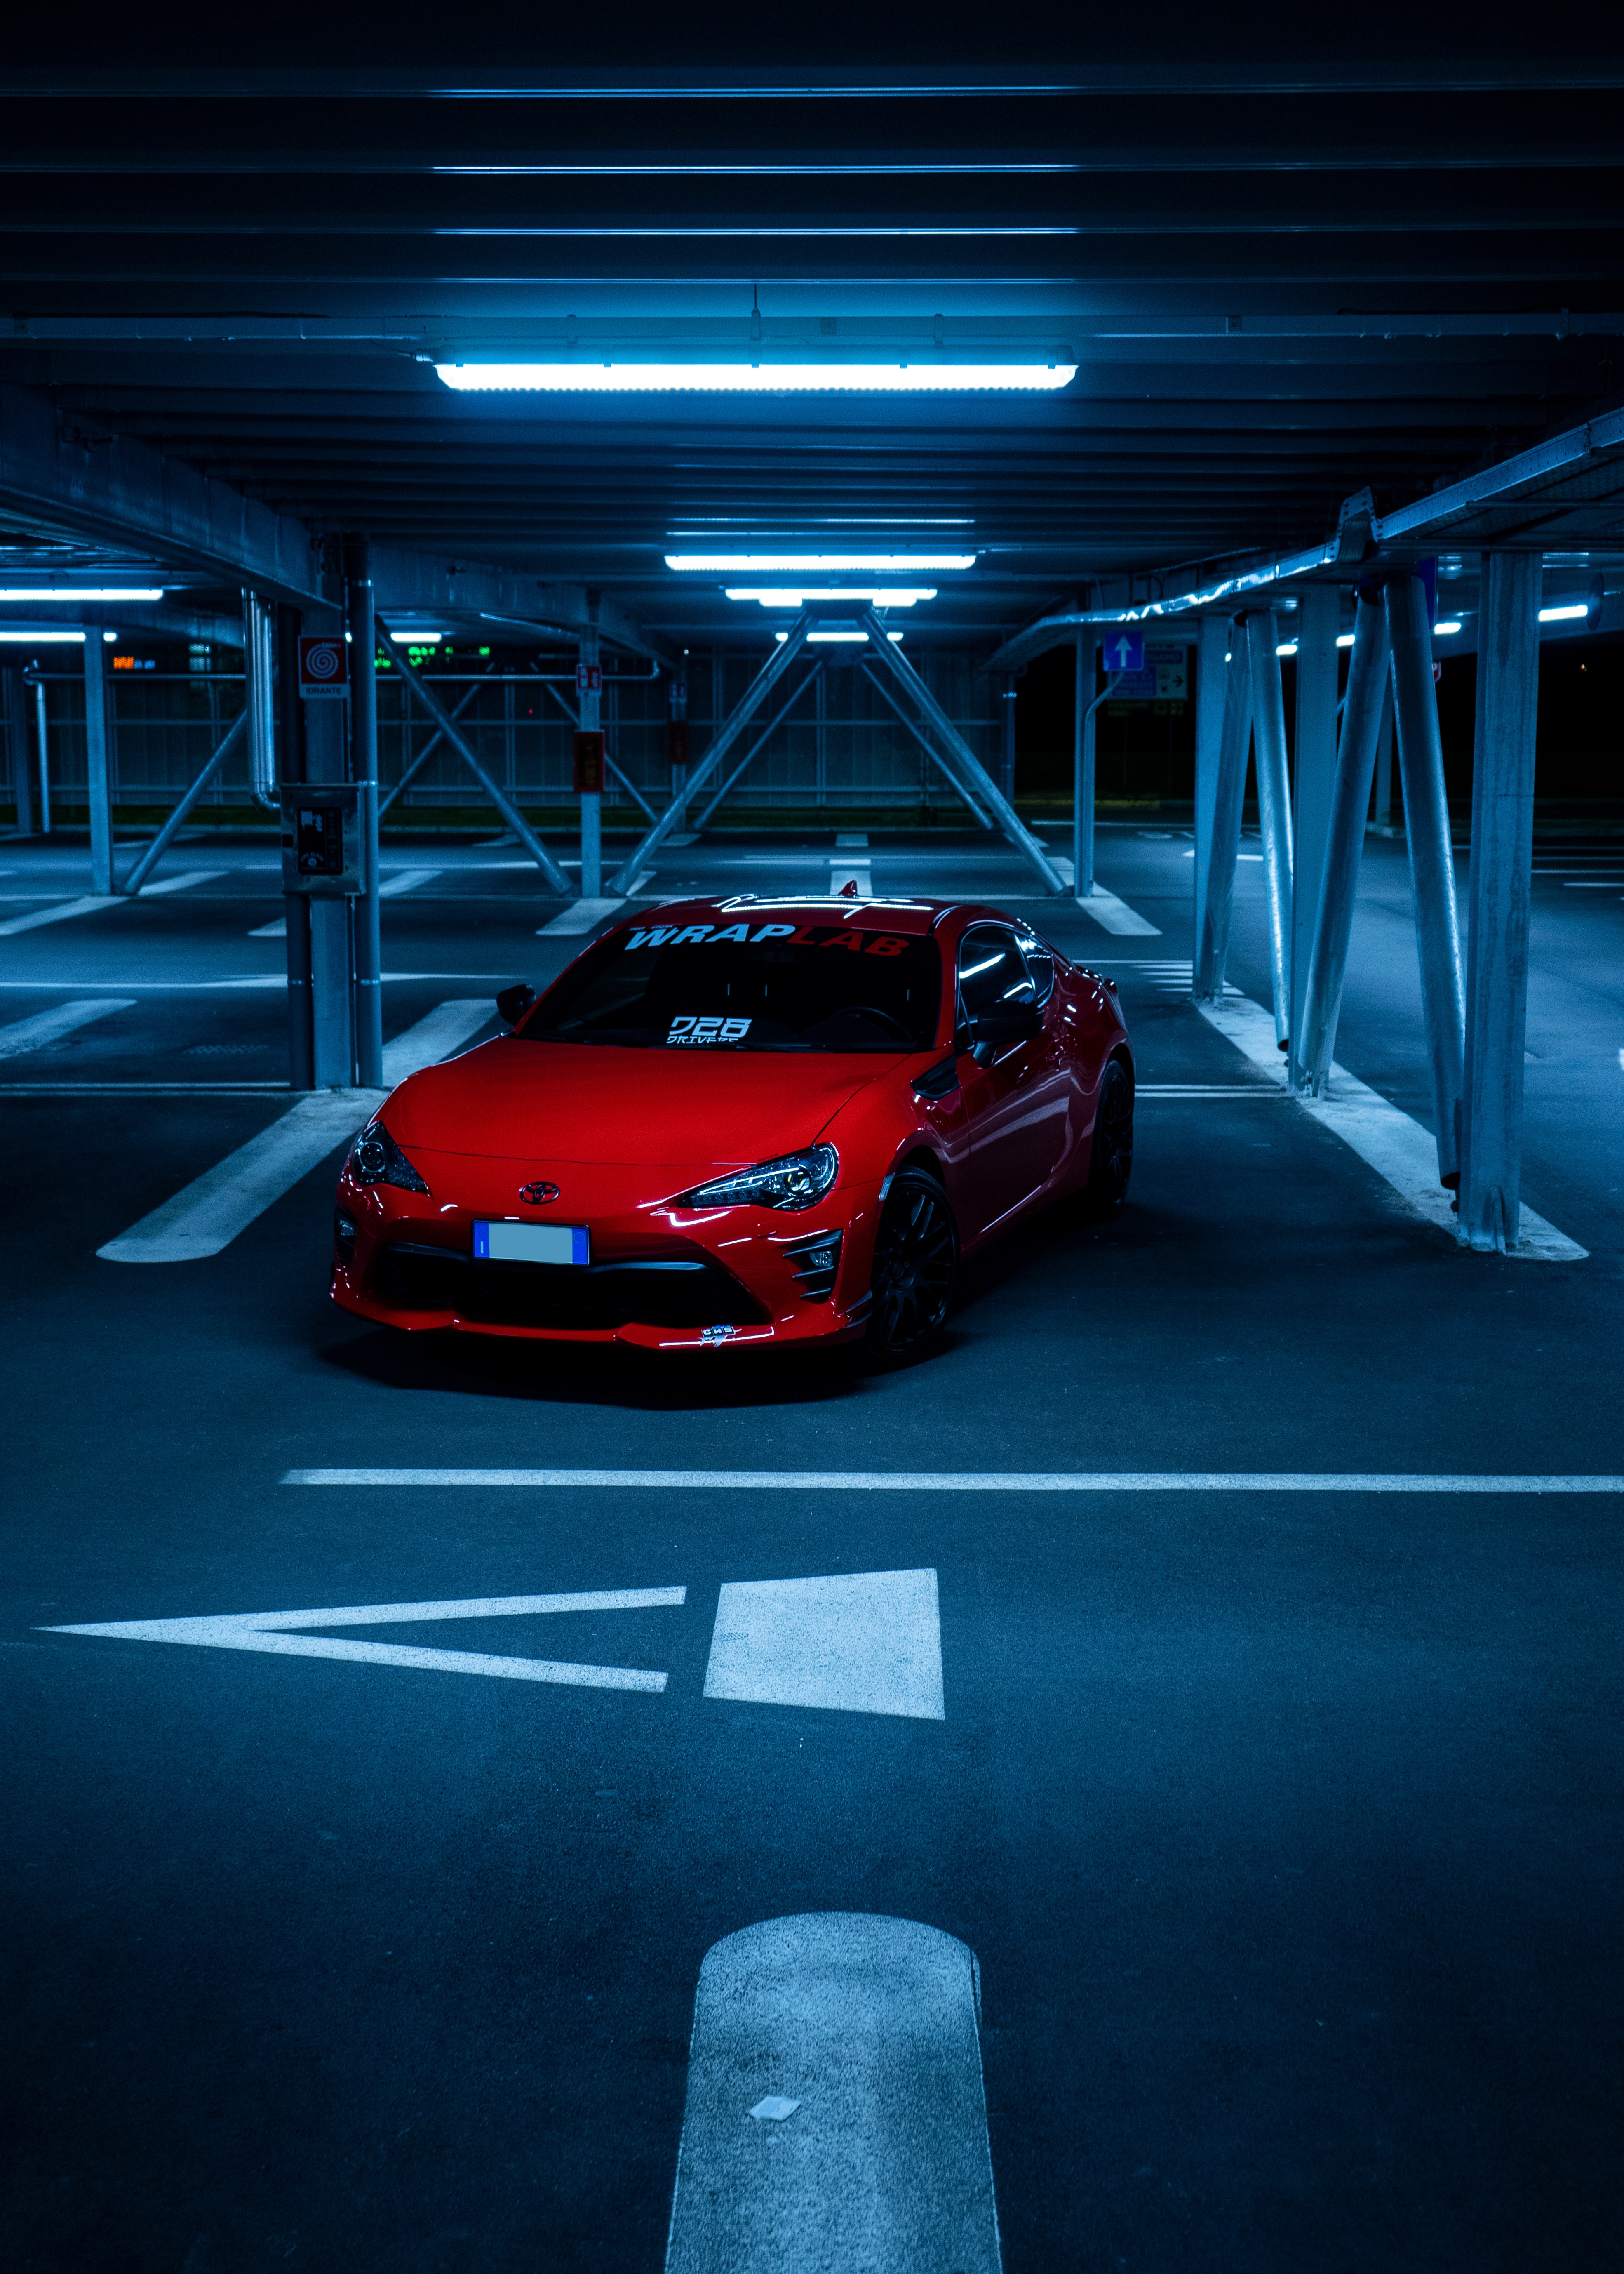 toyota, sports car, cars, sports, red, car, parking iphone wallpaper